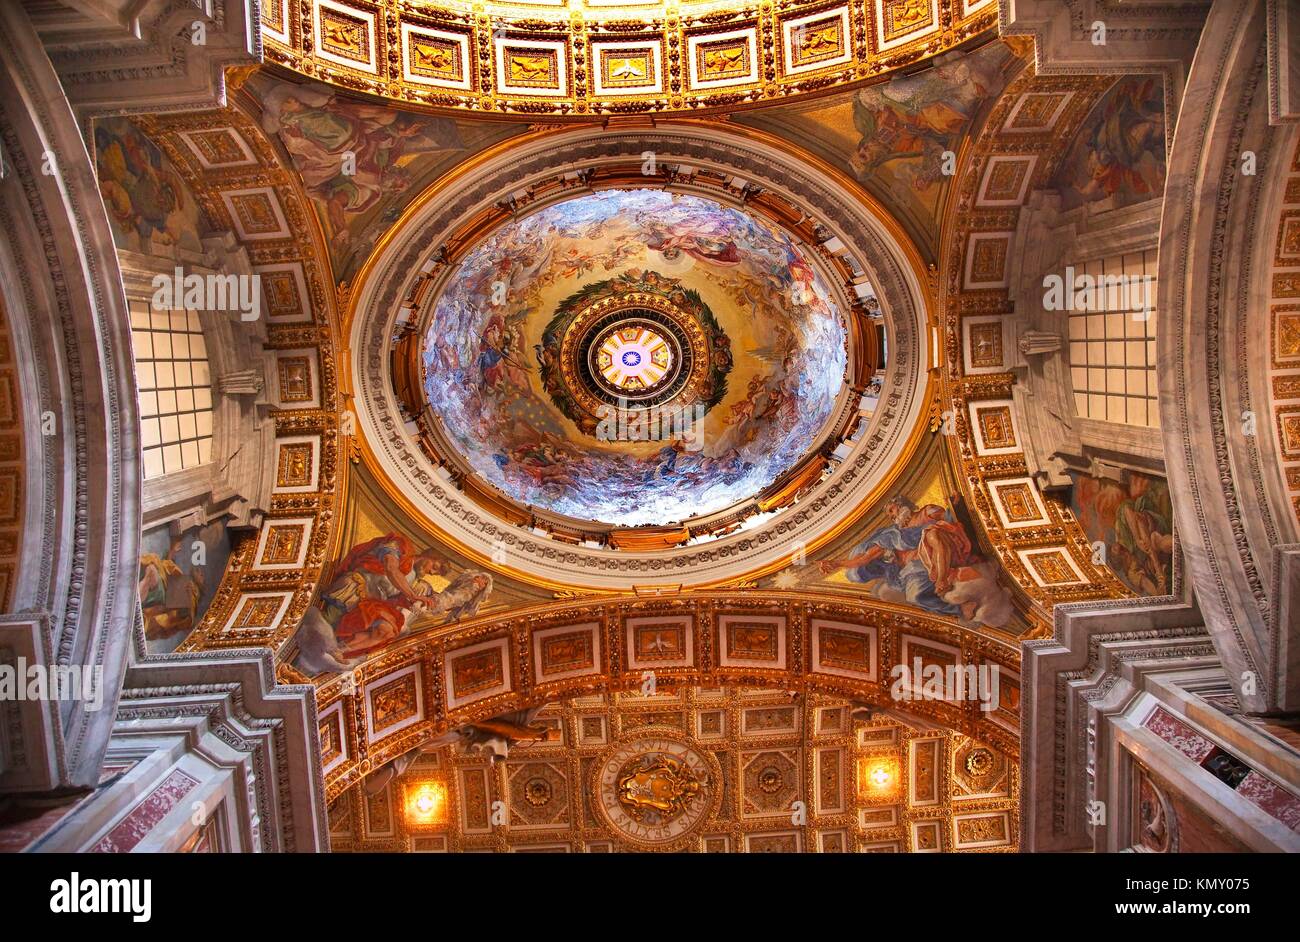 Vatican Inside Beautiful Gold Ceiling Dome Stock Photo - Alamy